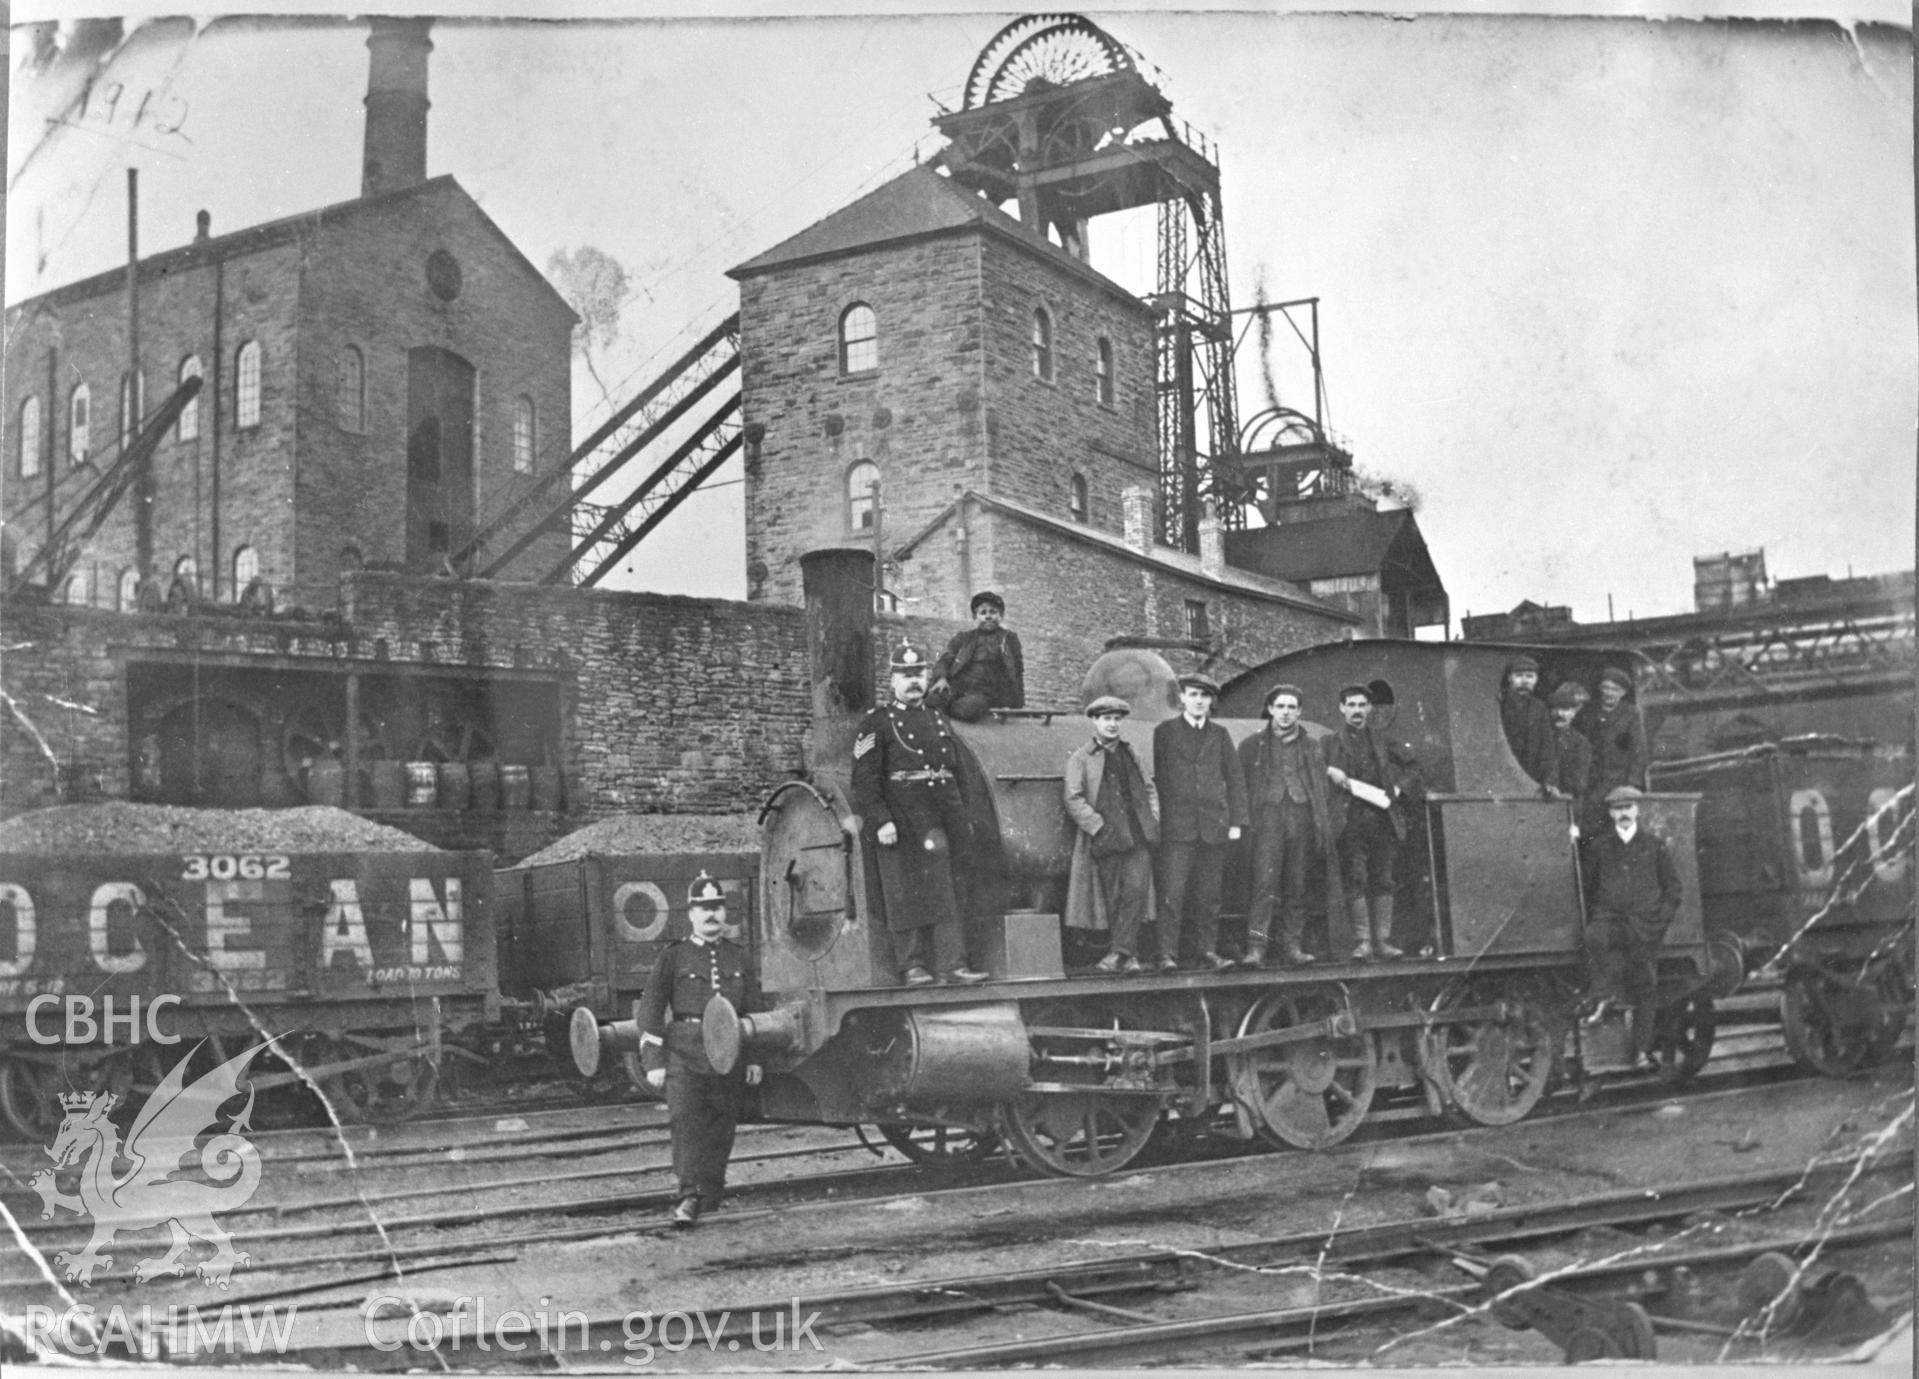 Digital copy of an acetate negative showing group of men, some police officers, on coal train engine at Ocean Deep Navigation Colliery, from the John Cornwell Collection.